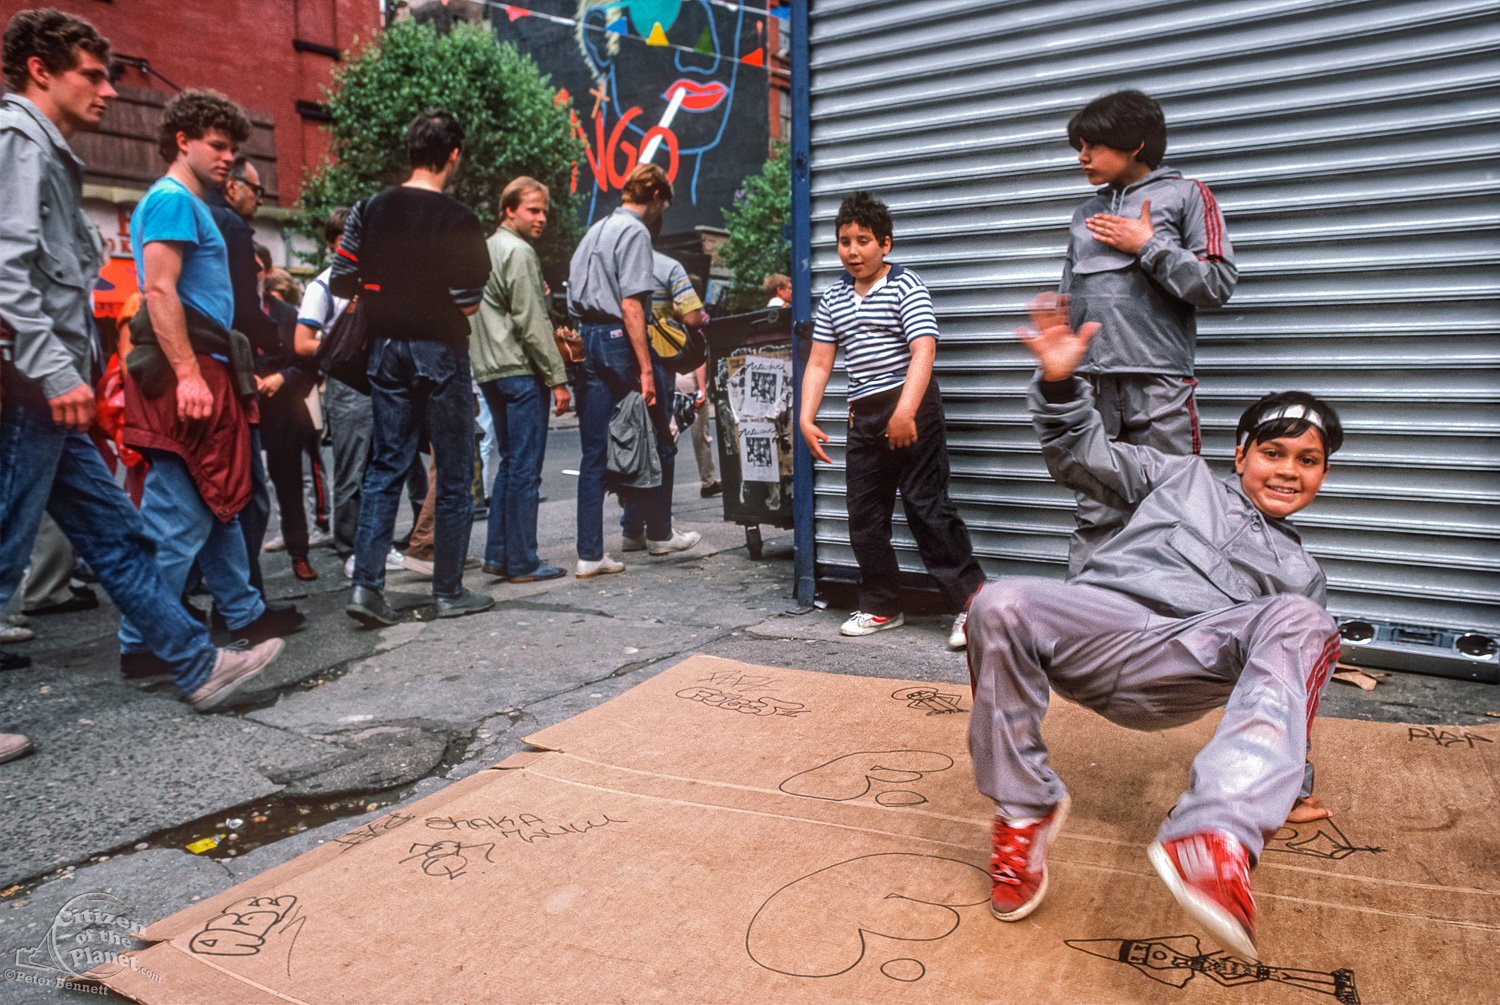  Break dancing on 3rd Ave and St Marks Place 